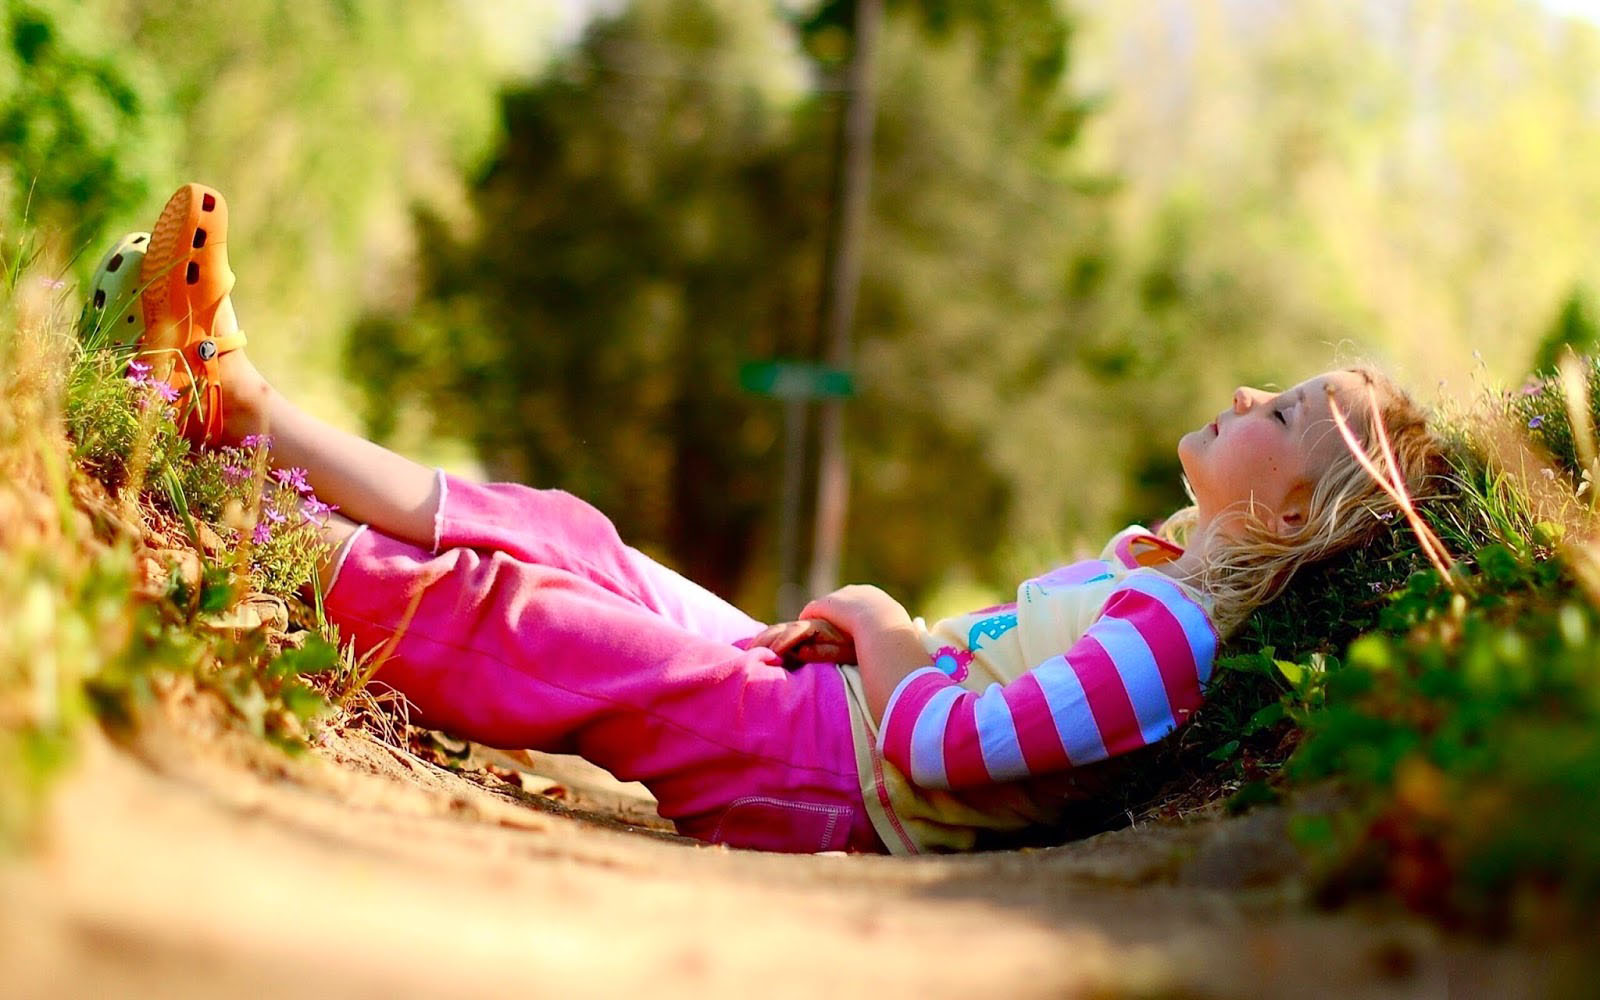 sad moment wallpaper,people in nature,nature,child,pink,grass